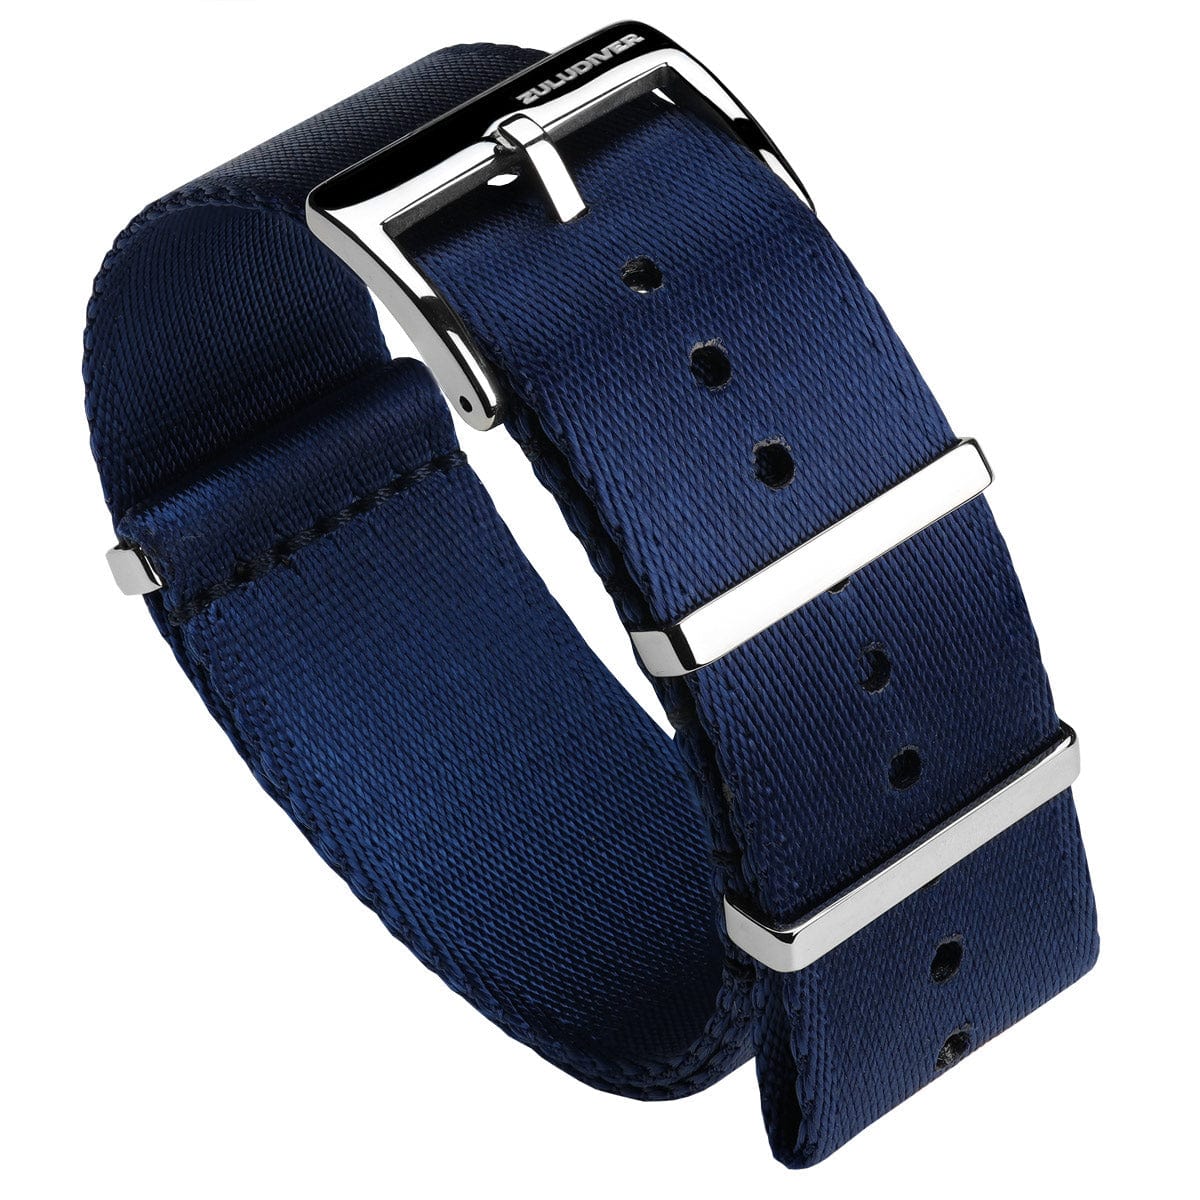 ZULUDIVER 1973 British Military Watch Strap: ARMOURED RECON - Navy Blue, Polished